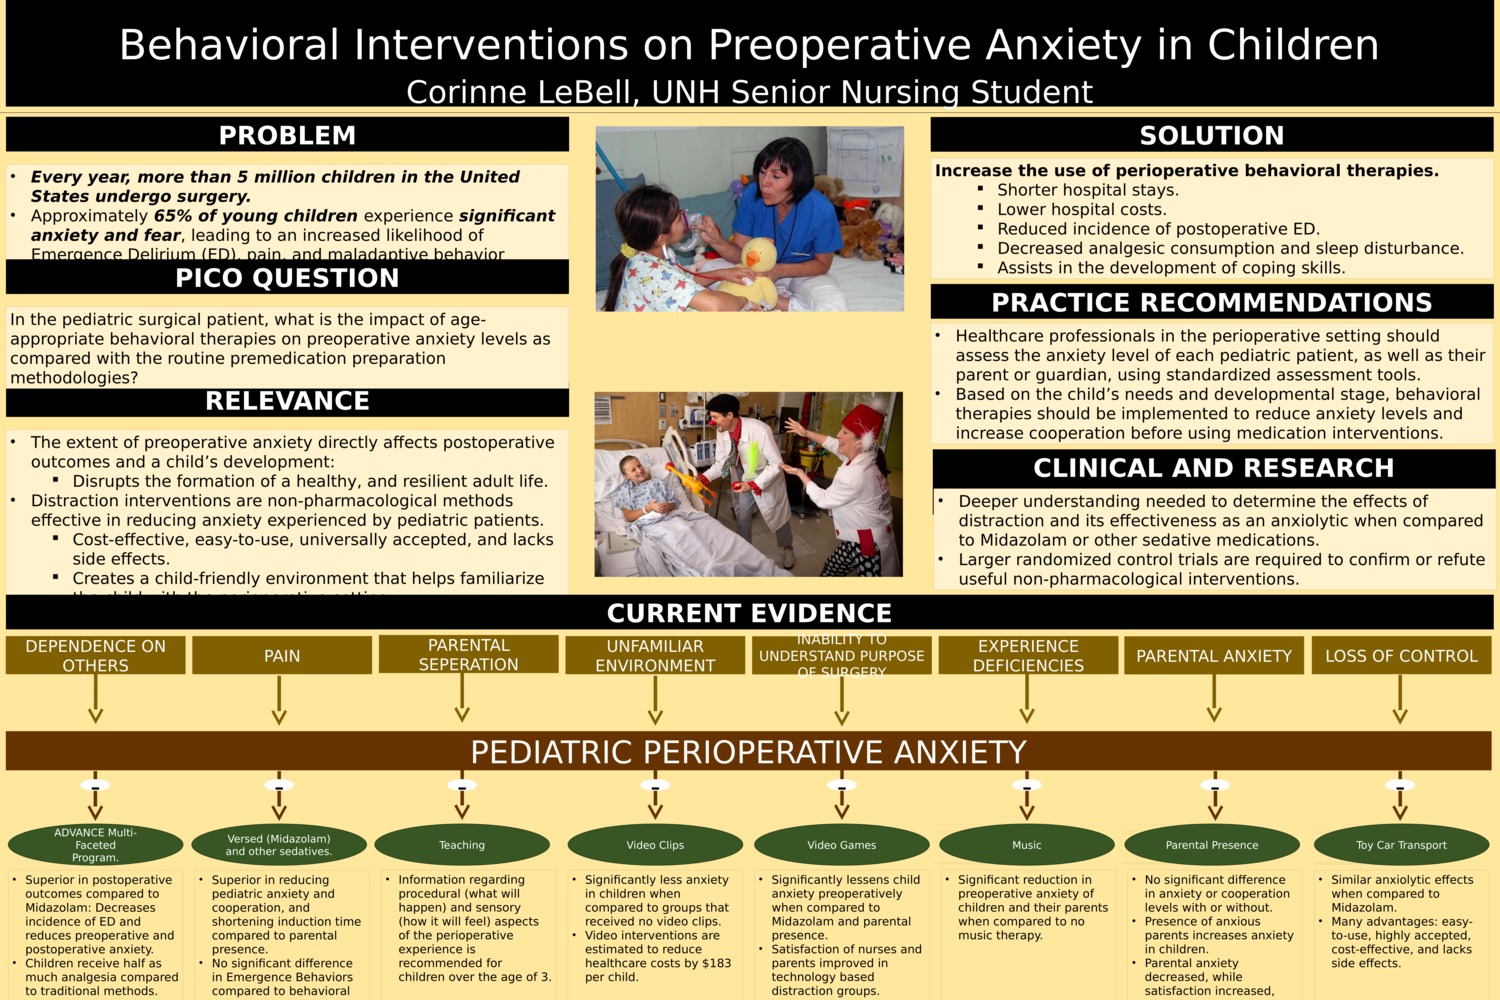 Behavioral Interventions On Preoperative Anxiety In Children. by cdl1002